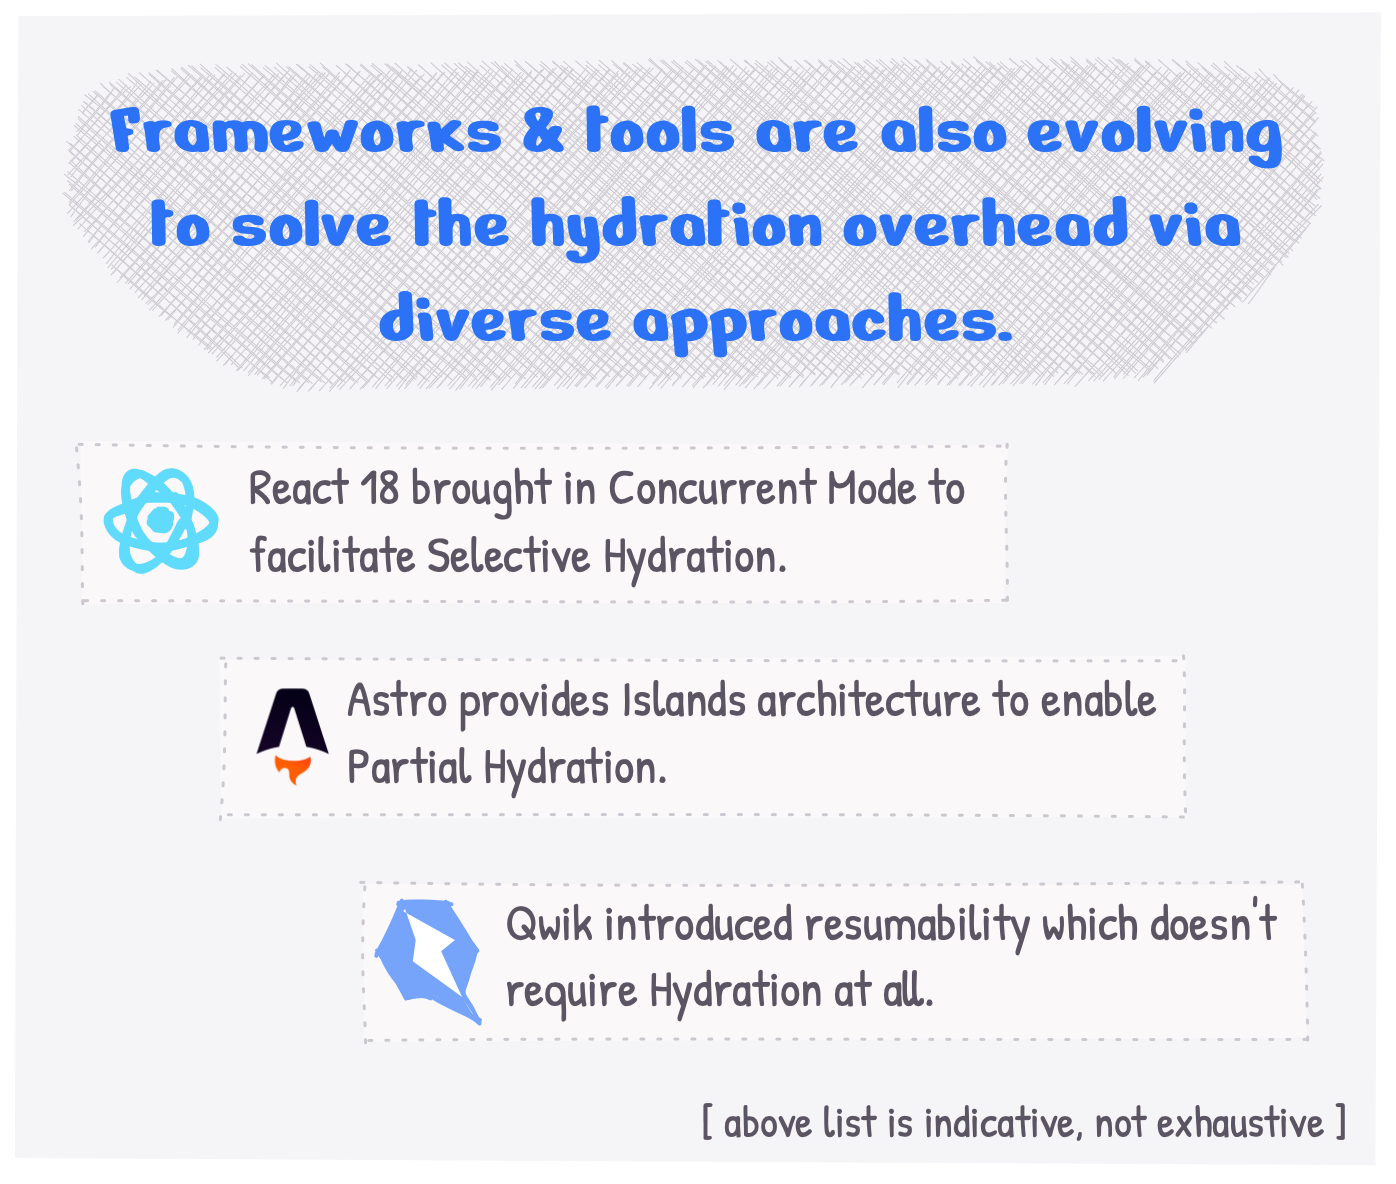 Can't frameworks reduce the Hydration overhead?